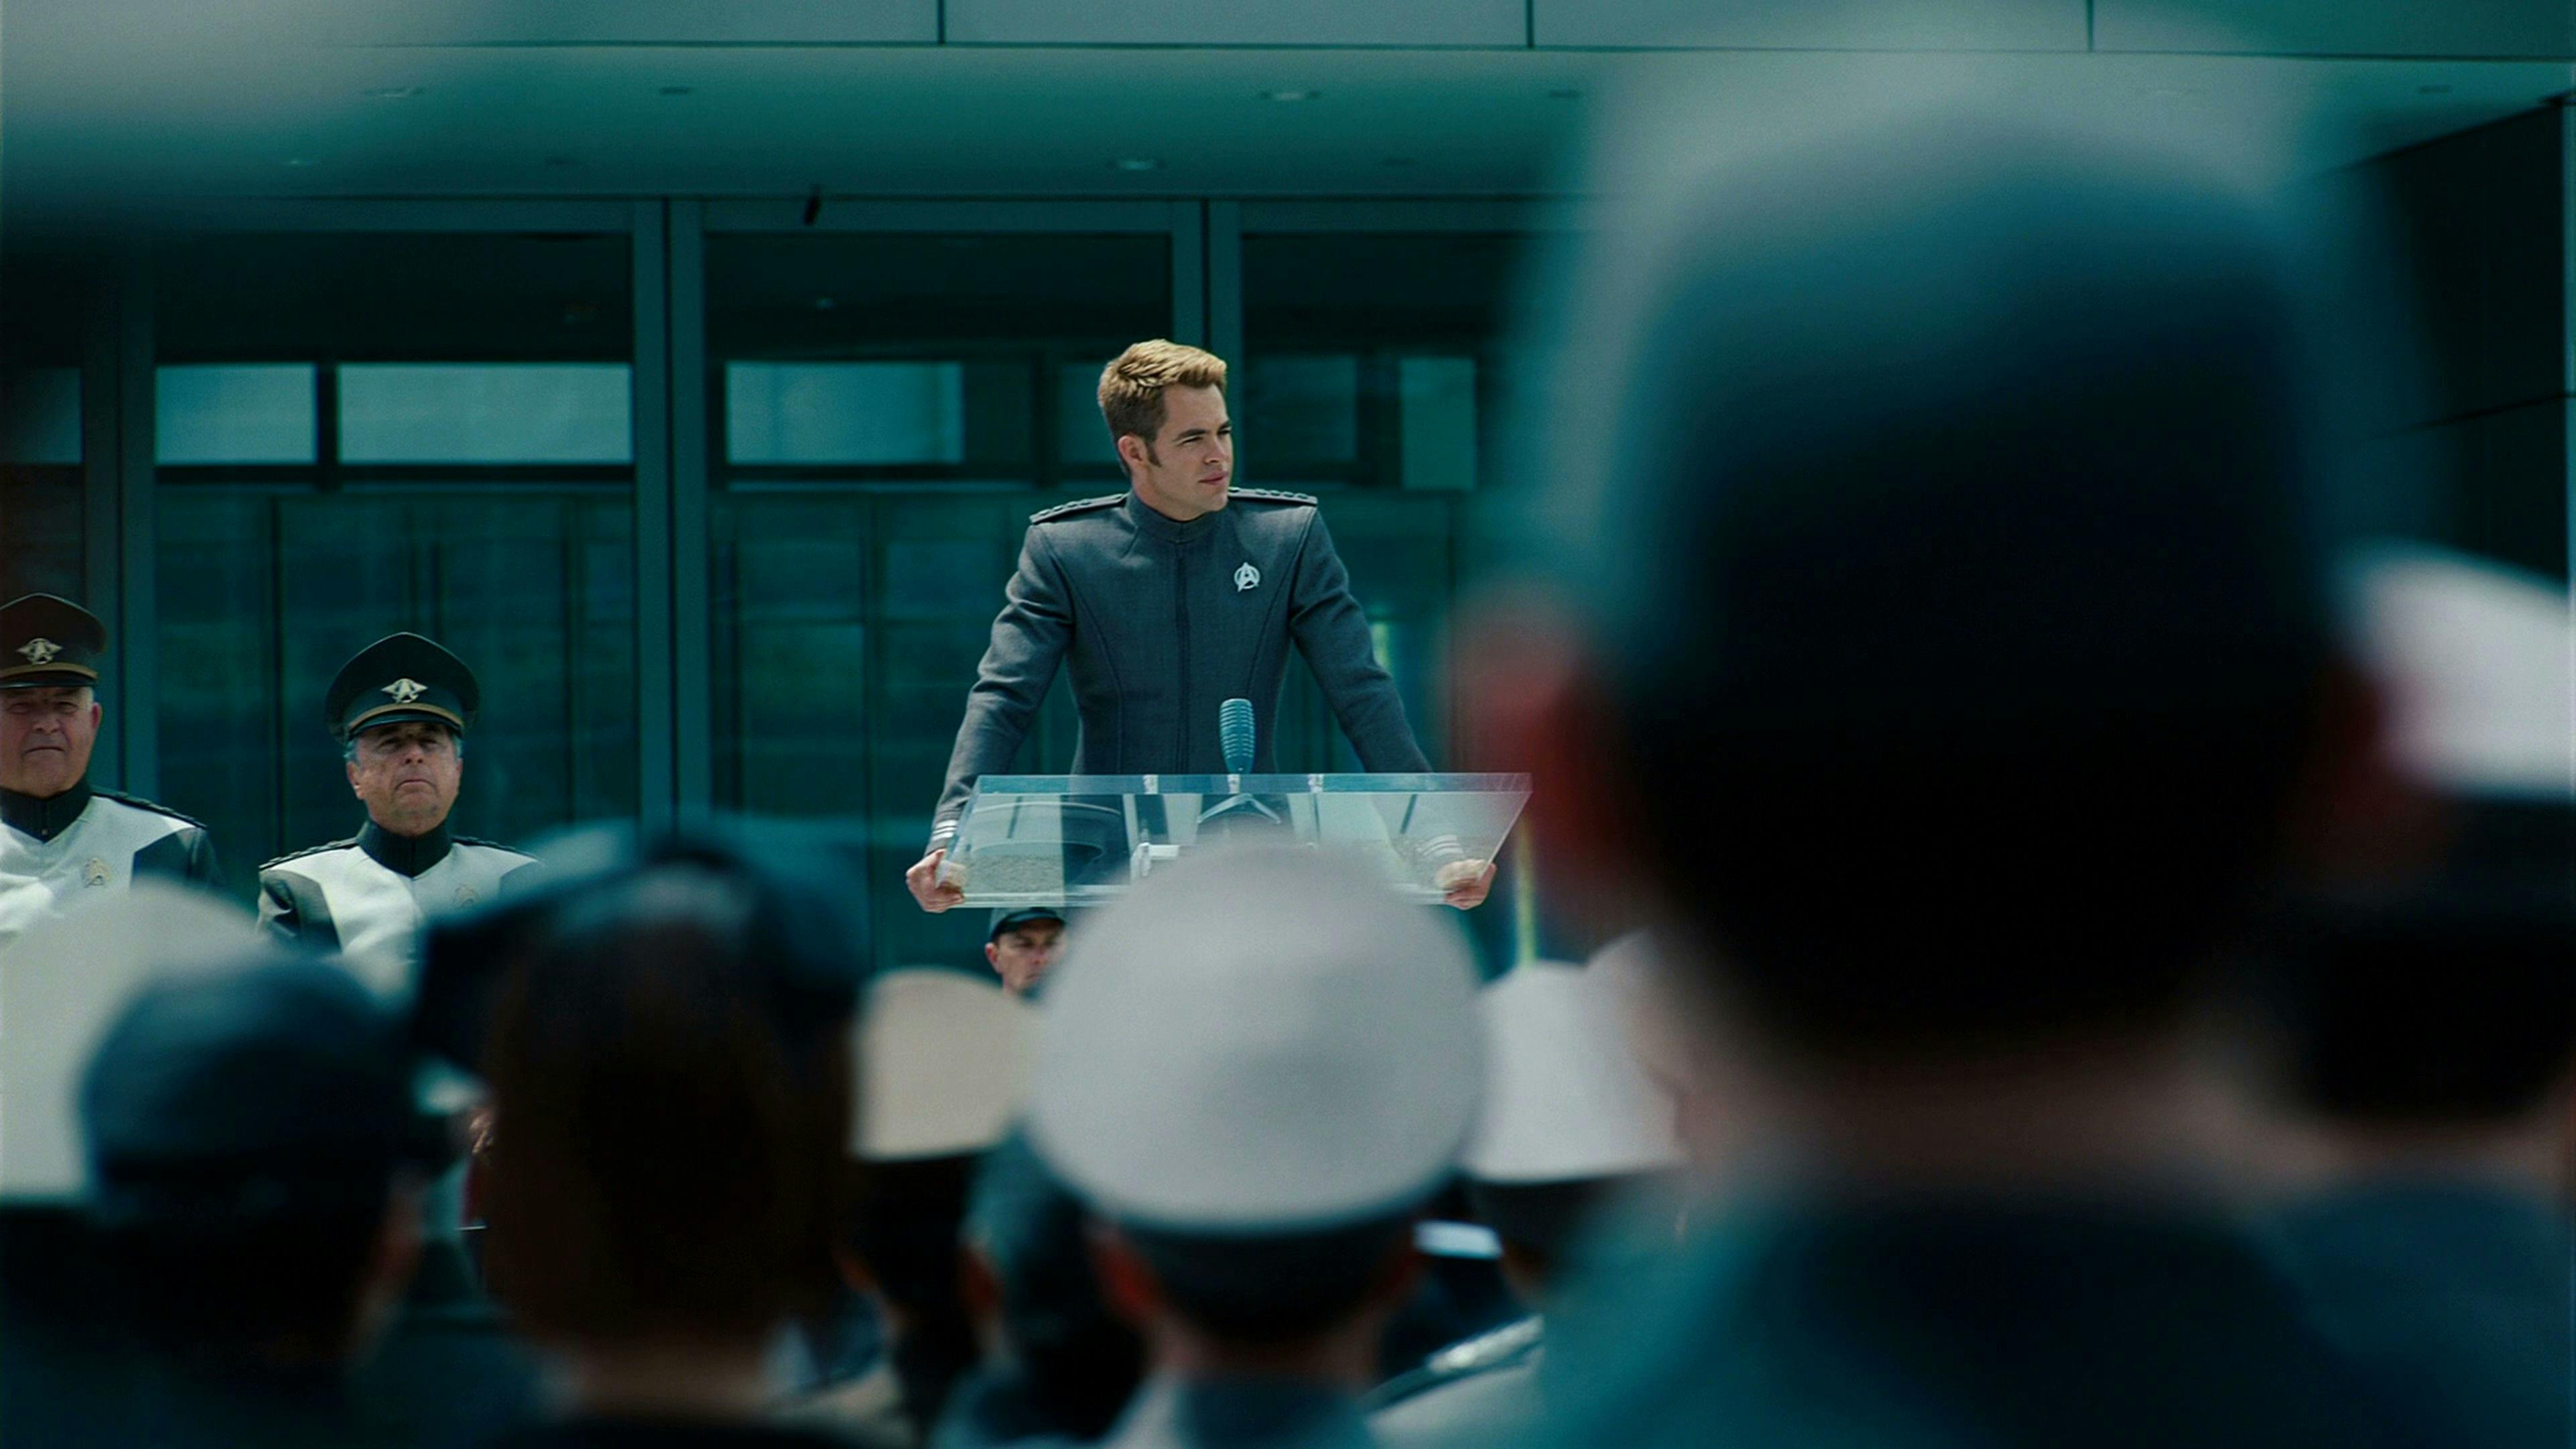 Speaking at the podium at the U.S.S. Enterprise rechristening ceremony, James Kirk address the crowd in Star Trek Into Darkness